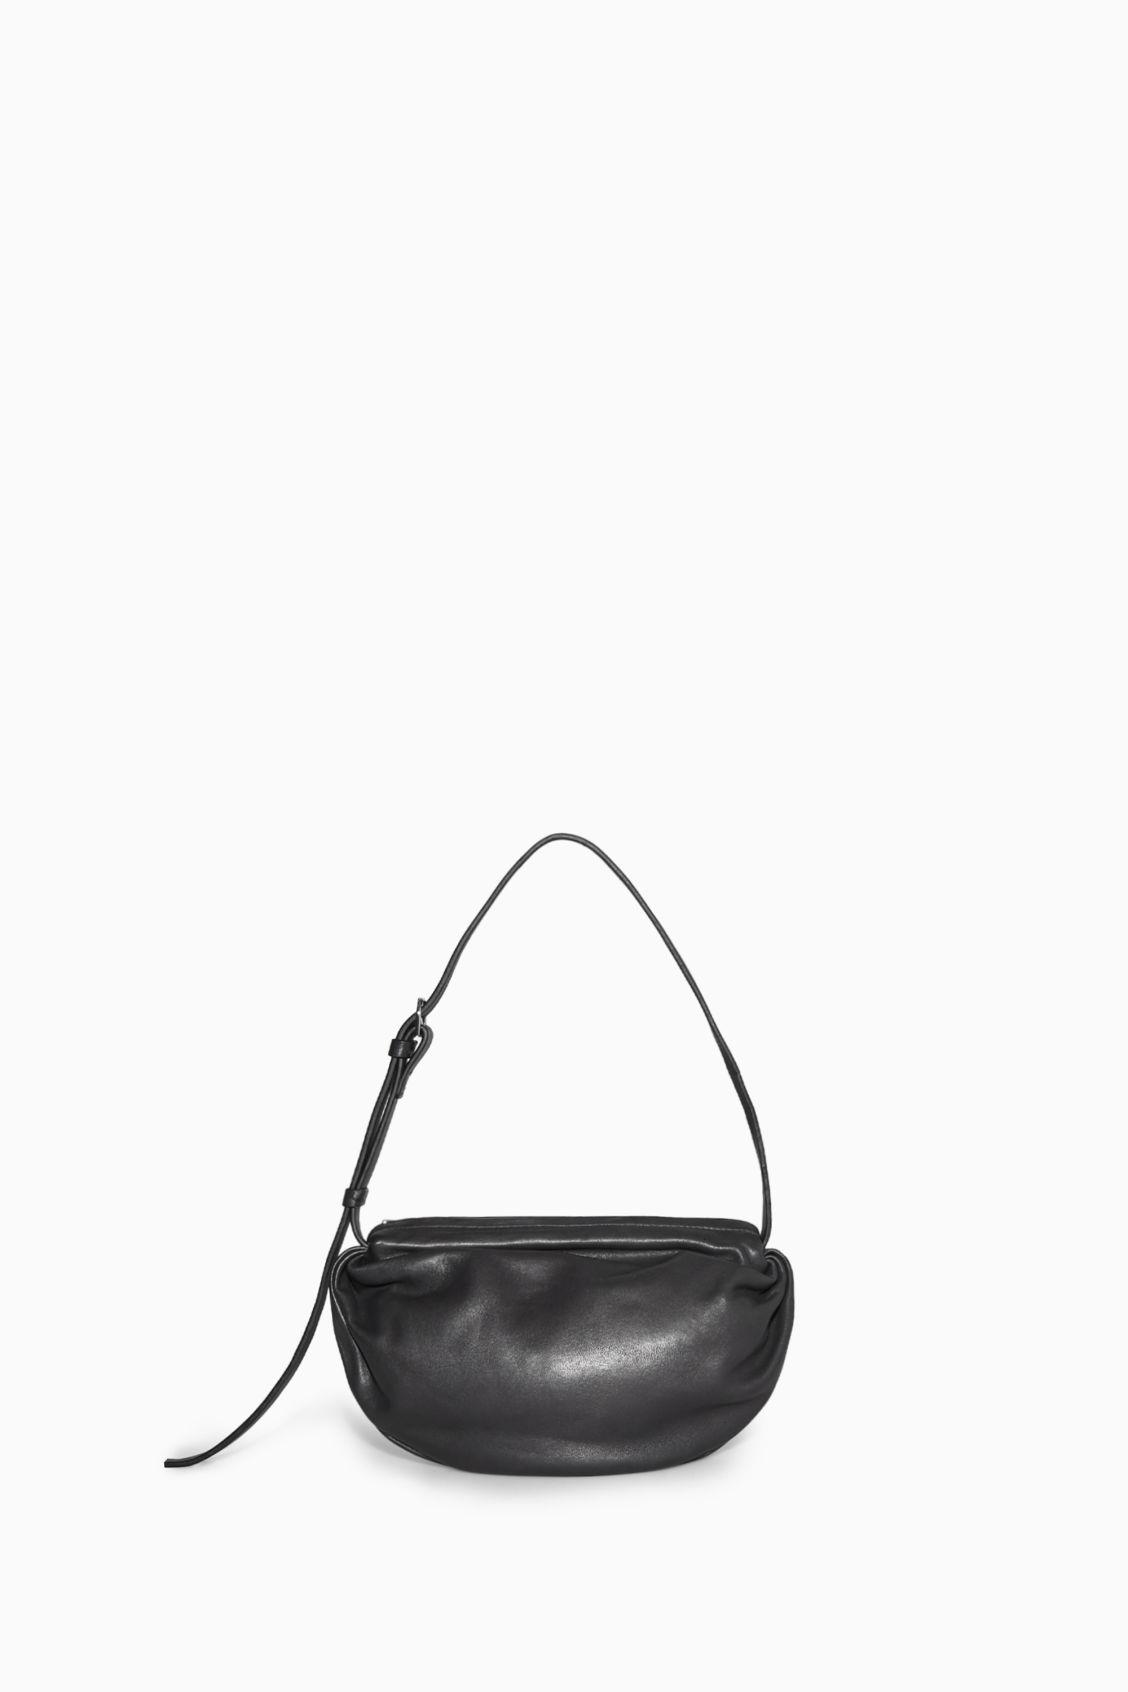 COS Gathered Leather Crossbody Bag in Black